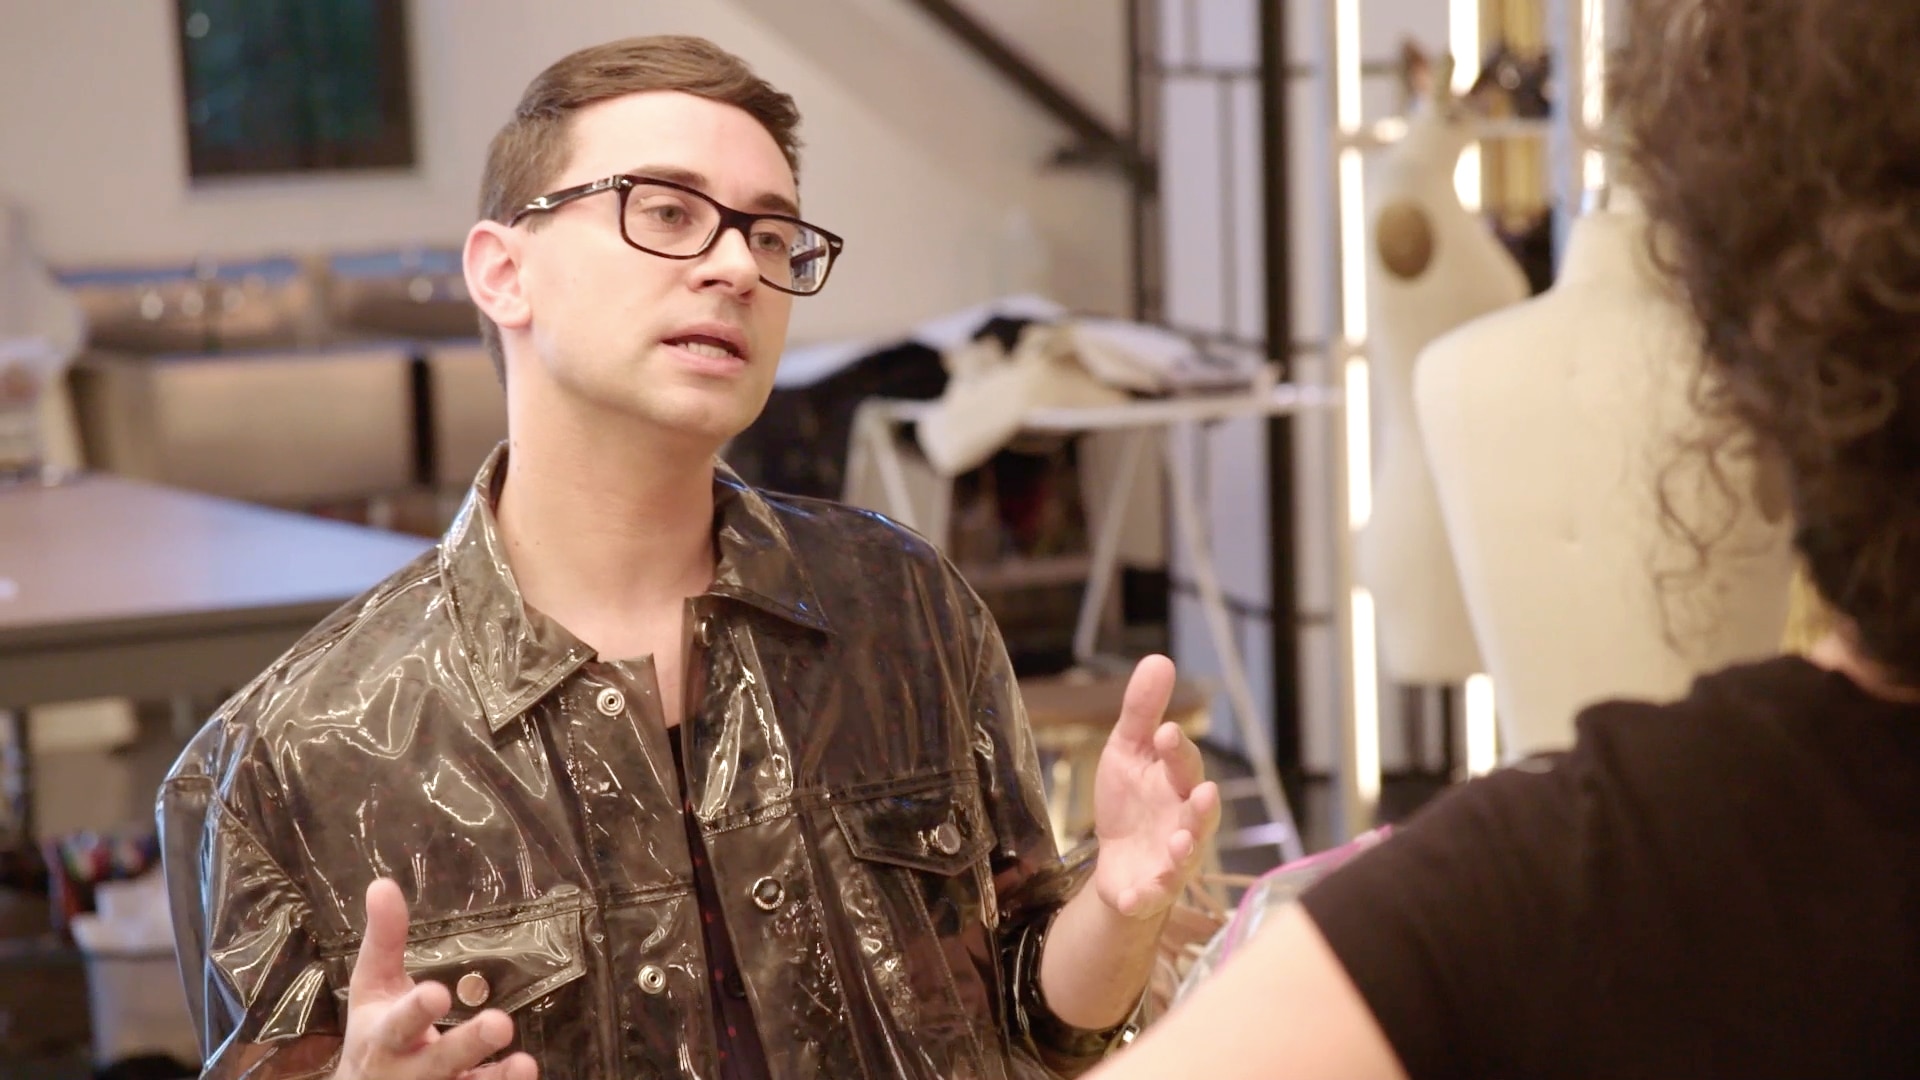 christian siriano project runway before after hair